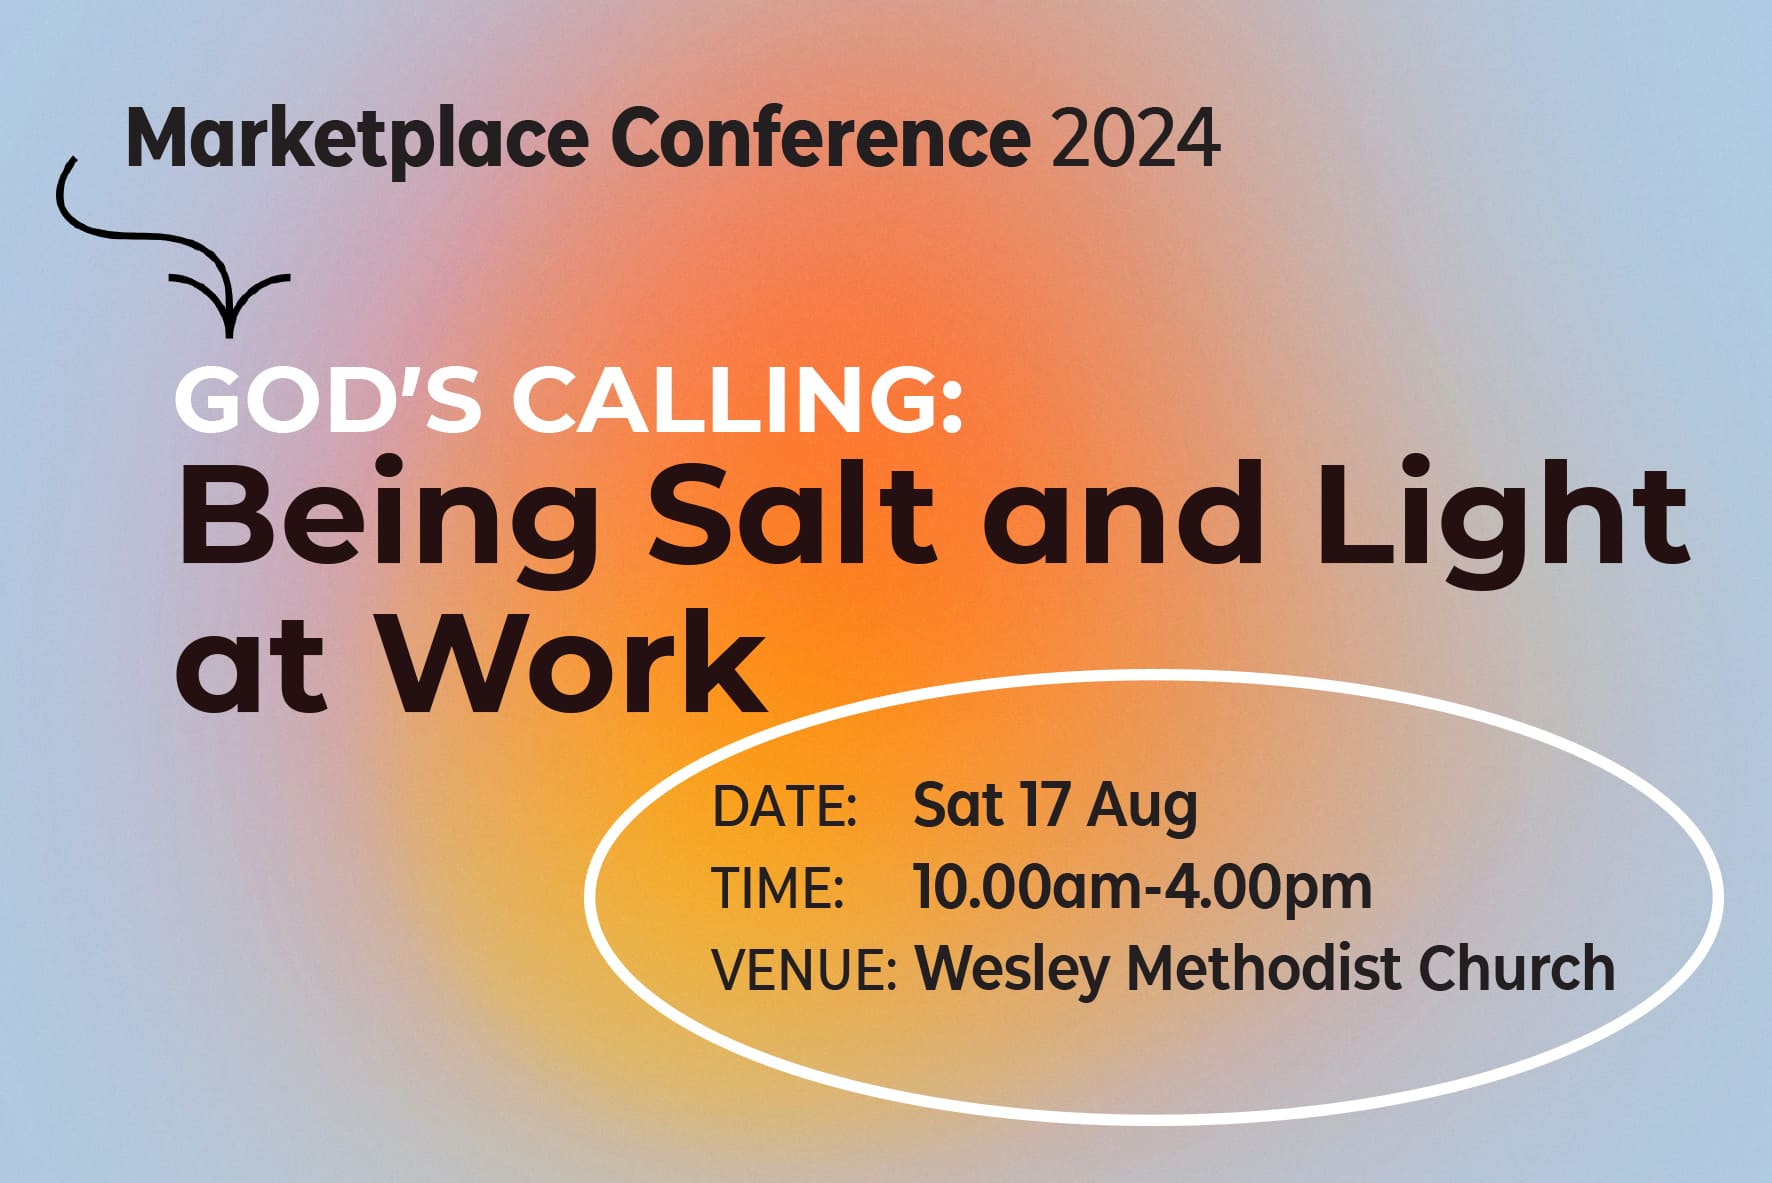 Marketplace Conference 2024 - God's Calling:Being Salt and Light at Work